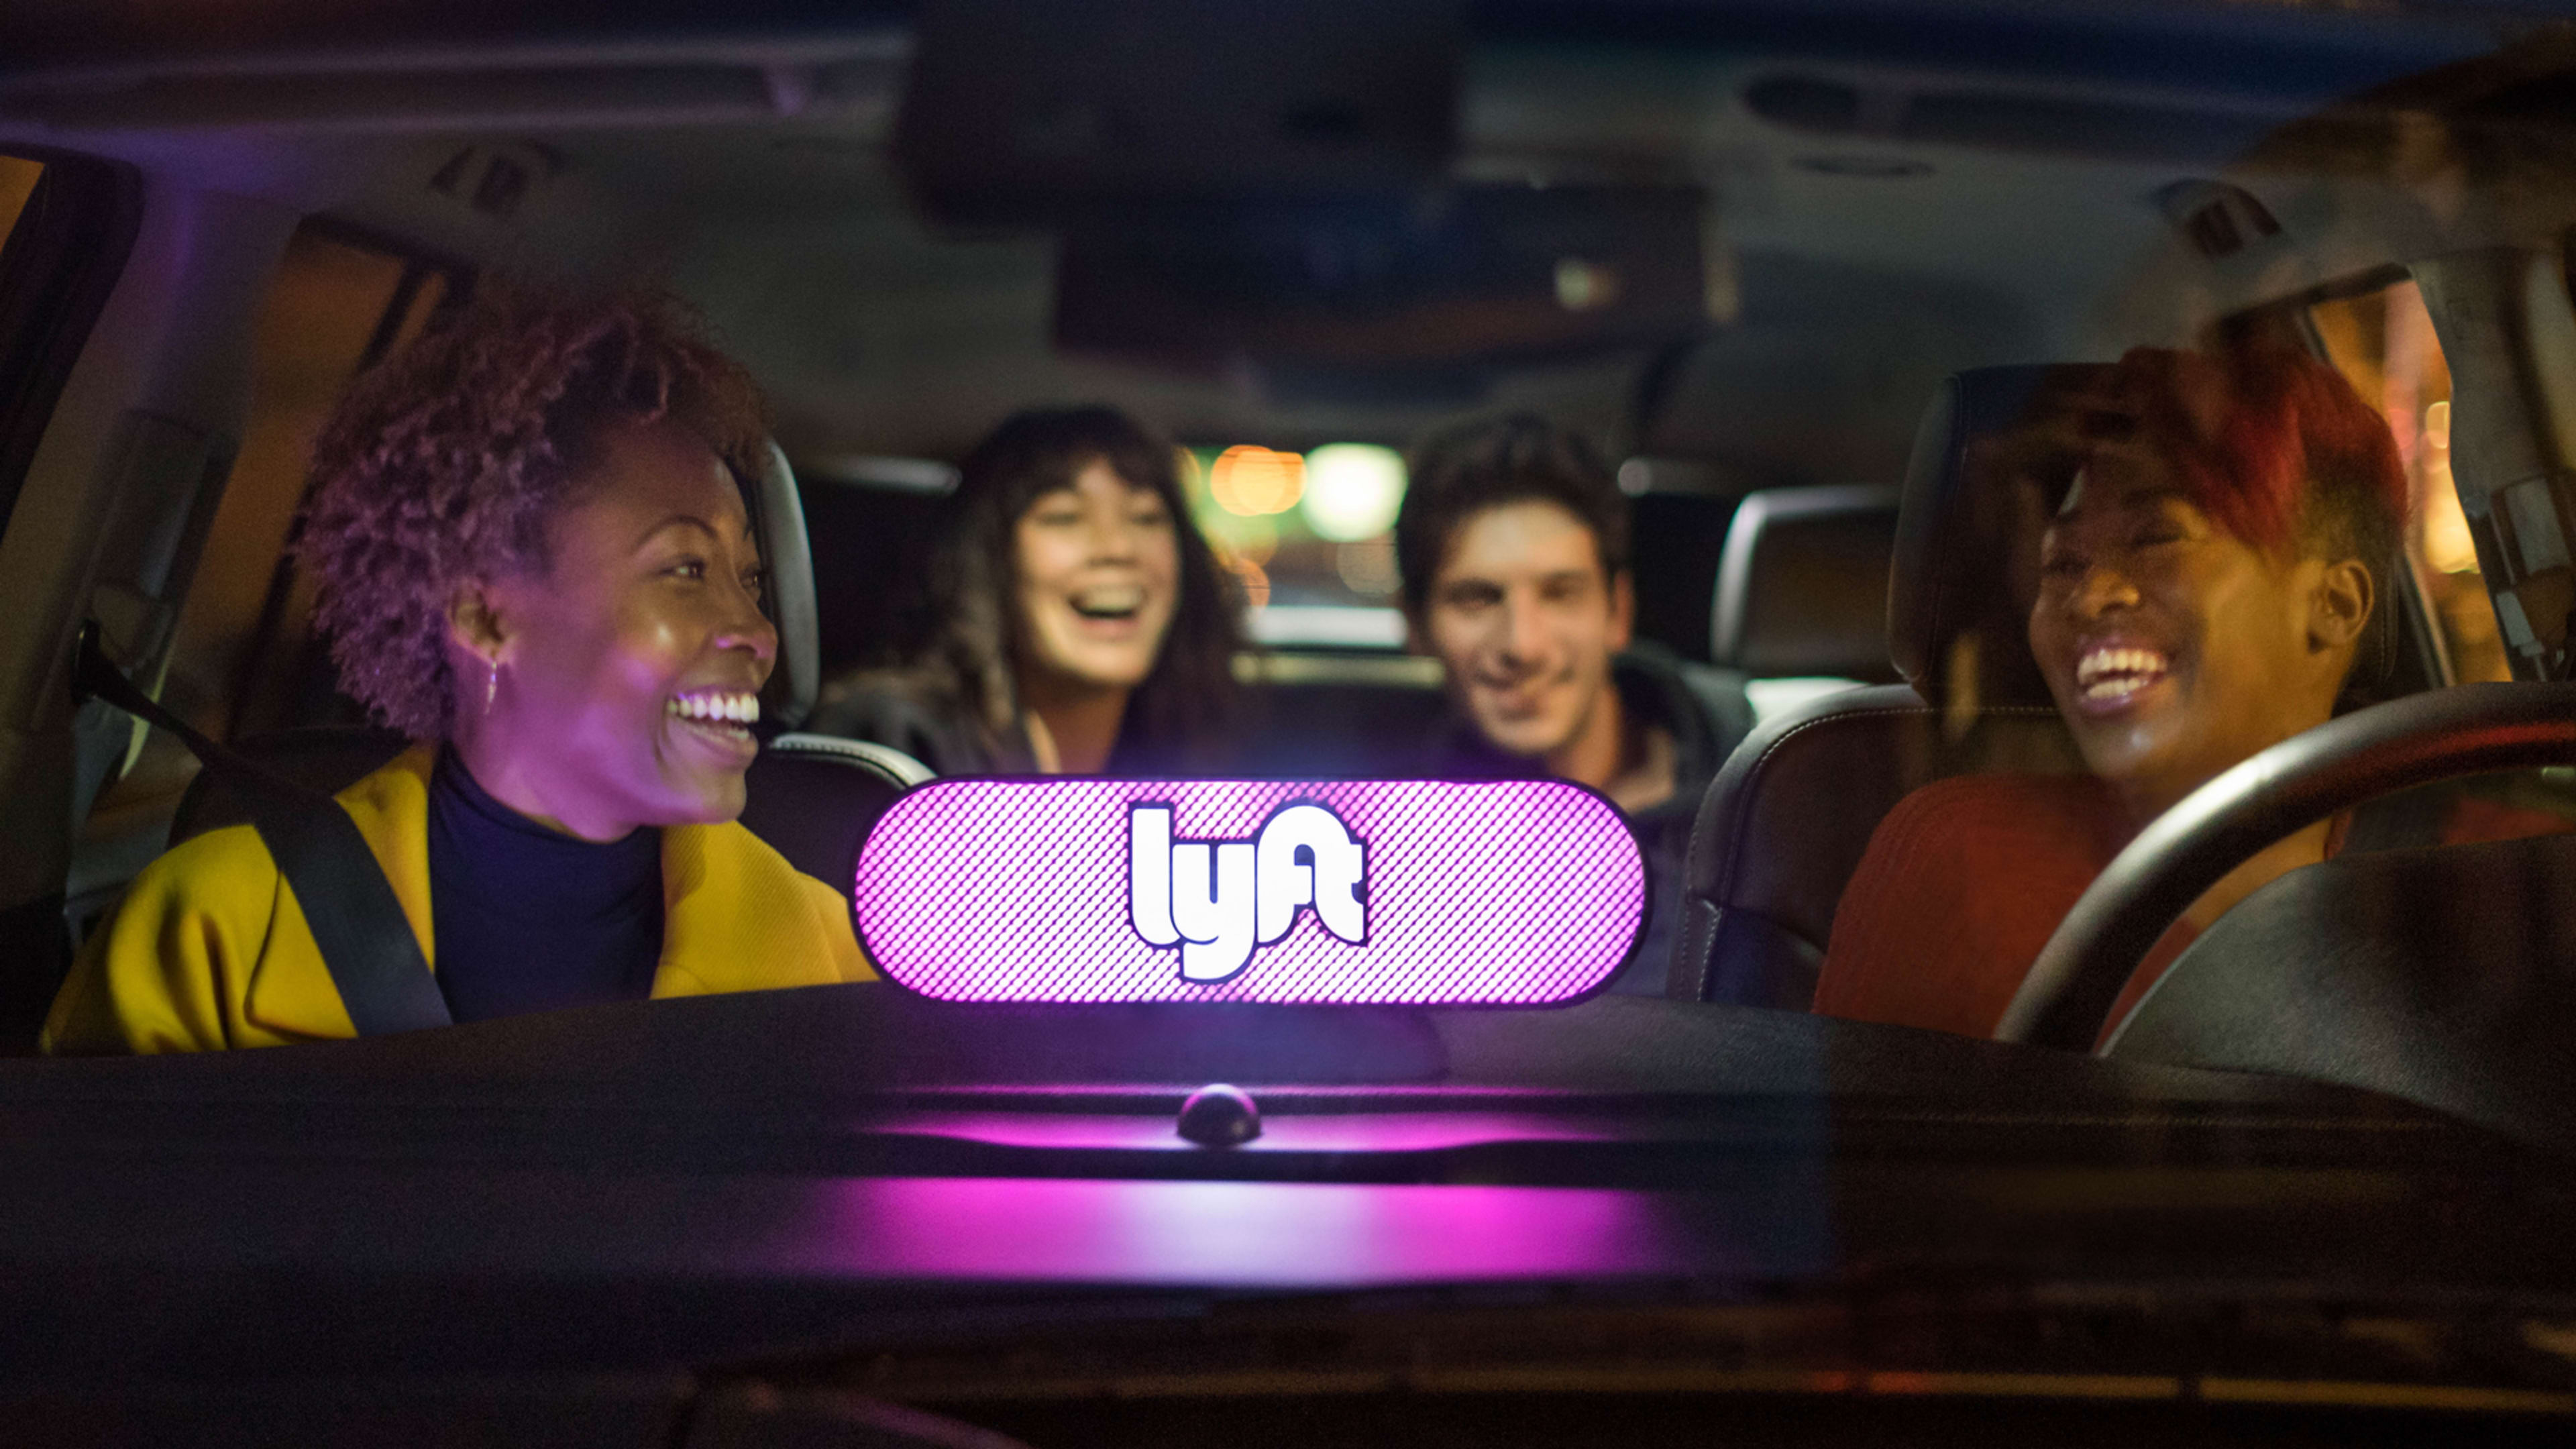 Why going public before Uber could give Lyft an advantage